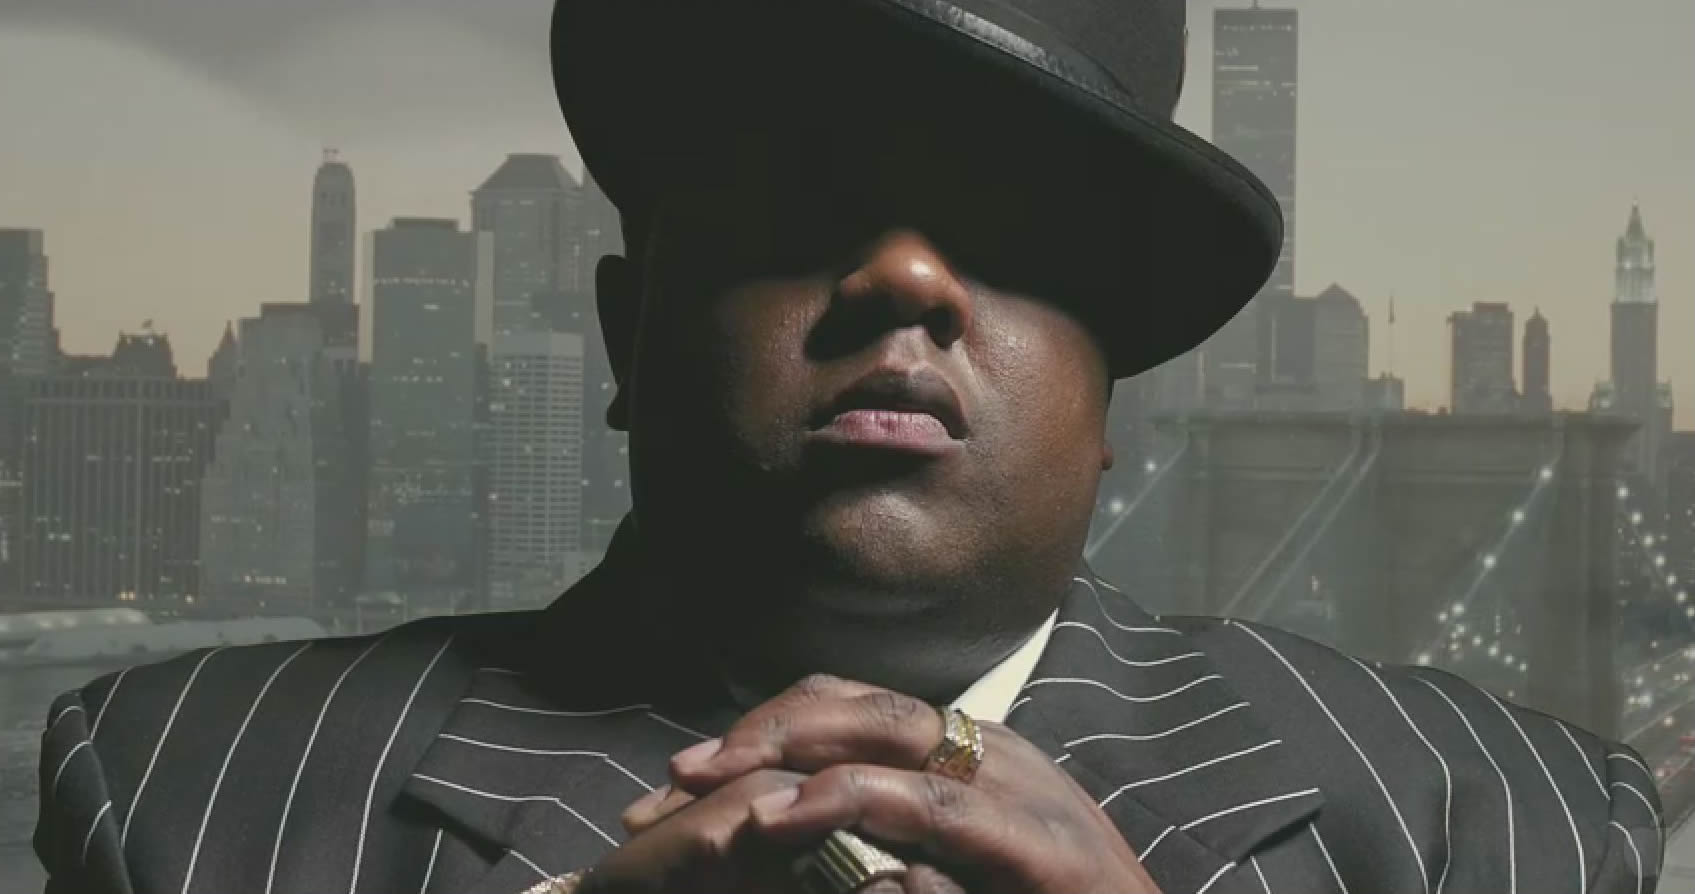 12. 'Notorious' (2009)